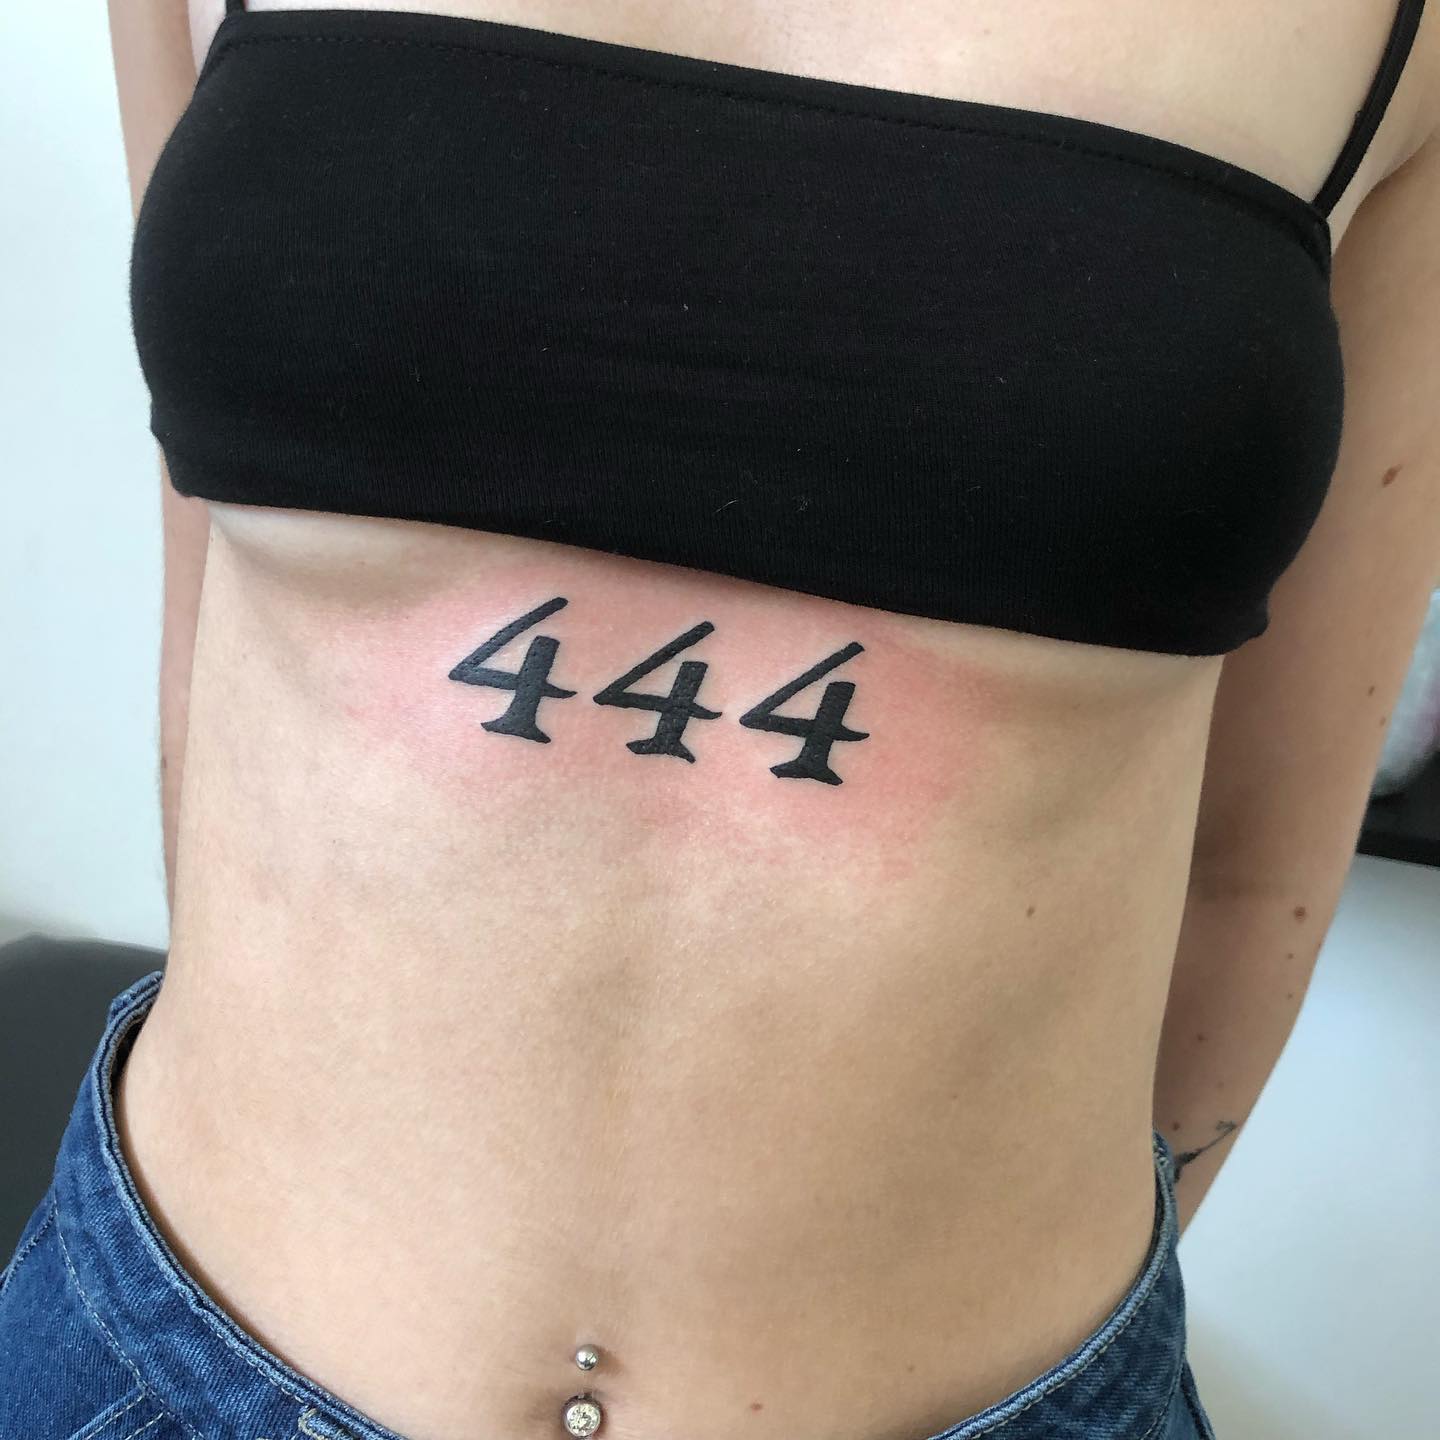 444 Tattoos: 20+ Design Ideas, Symbolism and Meaning - 100 Tattoos